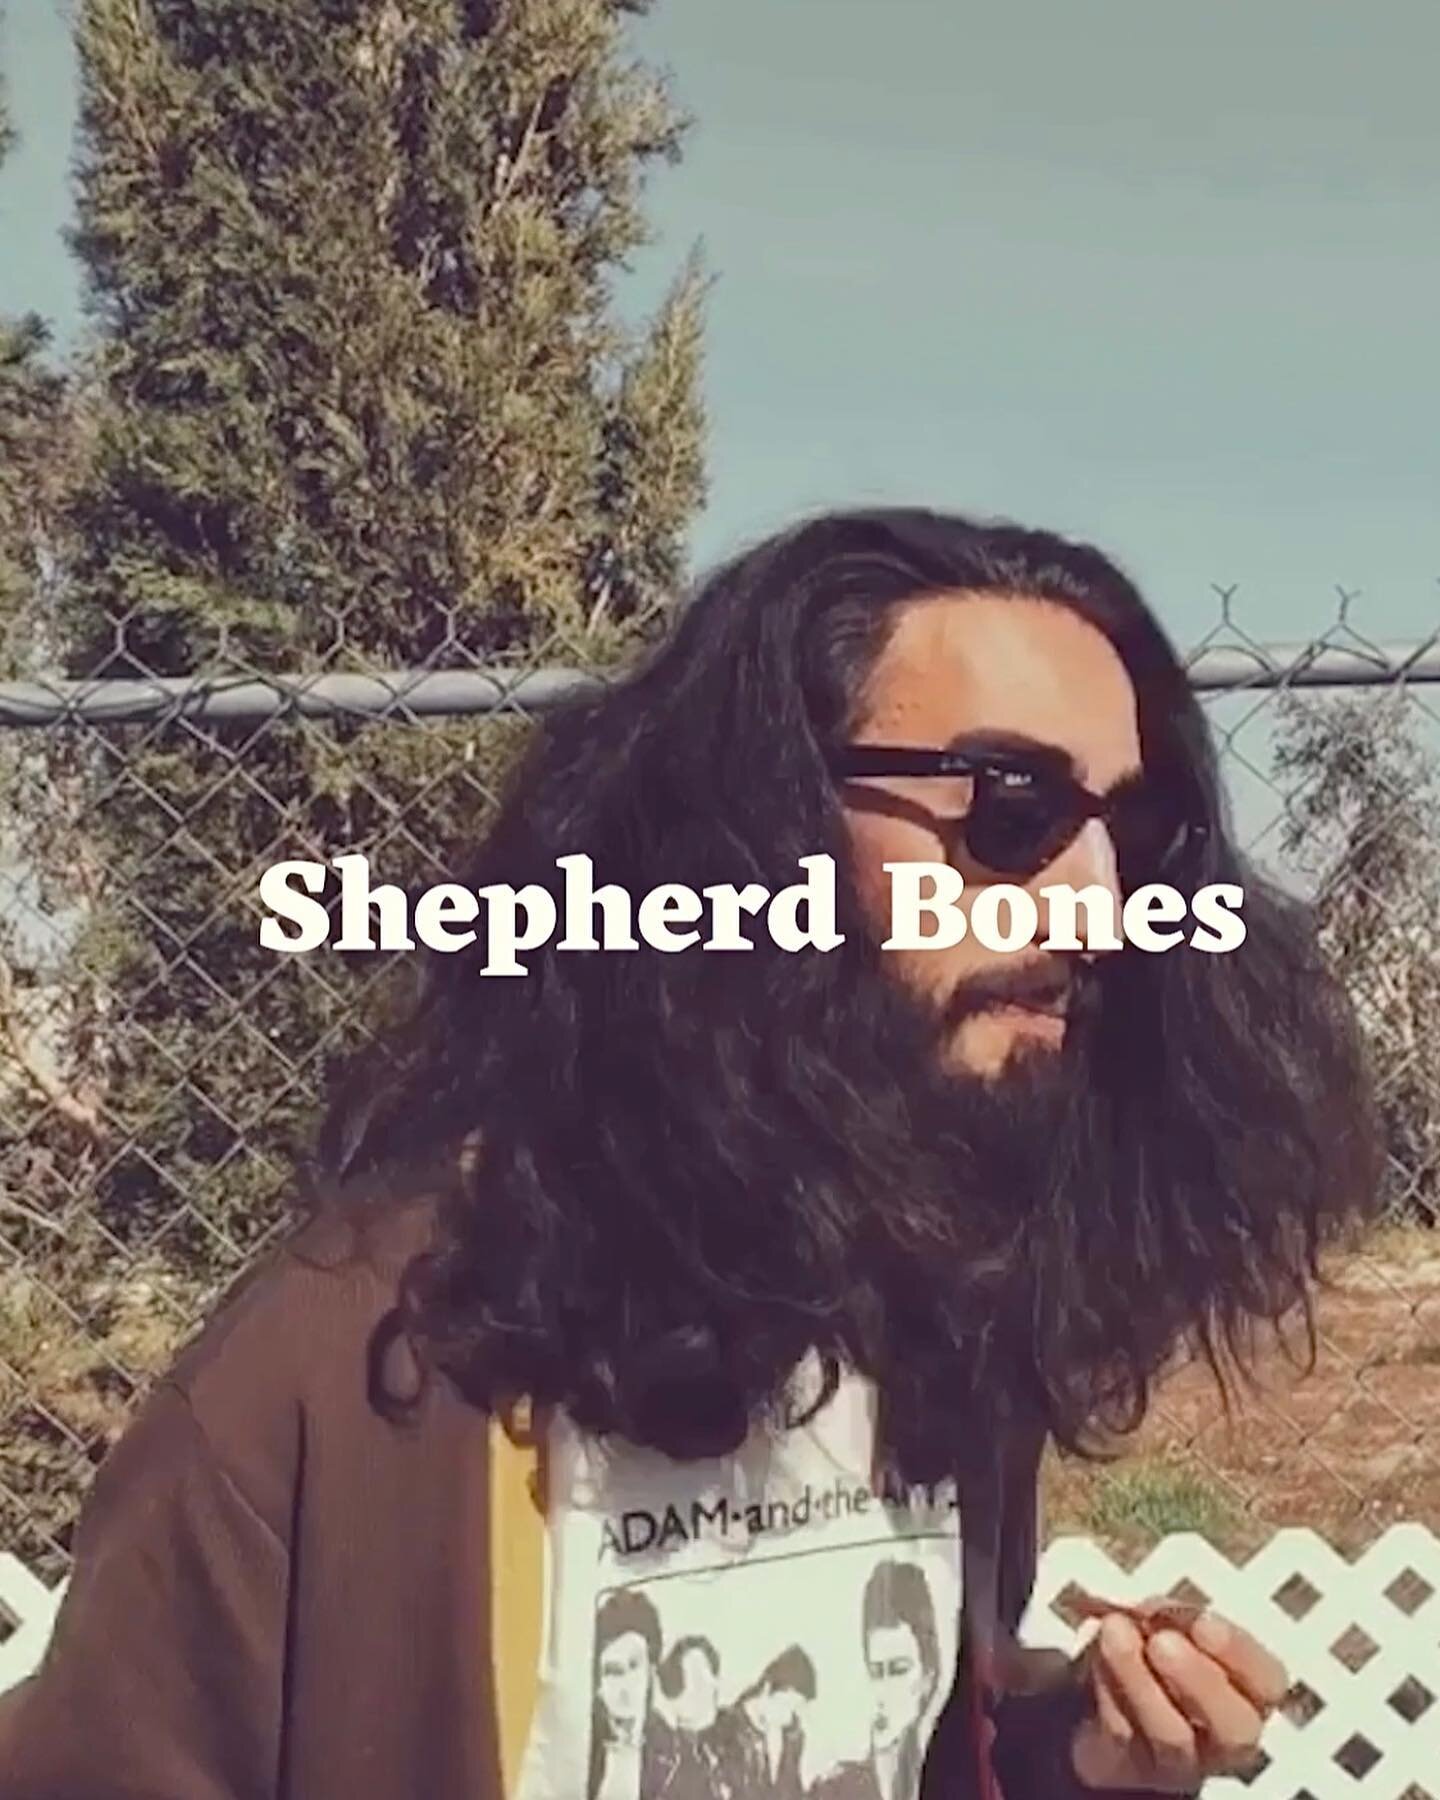 Four to five years ago, I created the persona of &lsquo;Shepherd Bones&rsquo; as a way to immerse myself fully in a recording studio experience and mark a significant period of my musical journey. I traveled to the Joshua Tree desert in California to